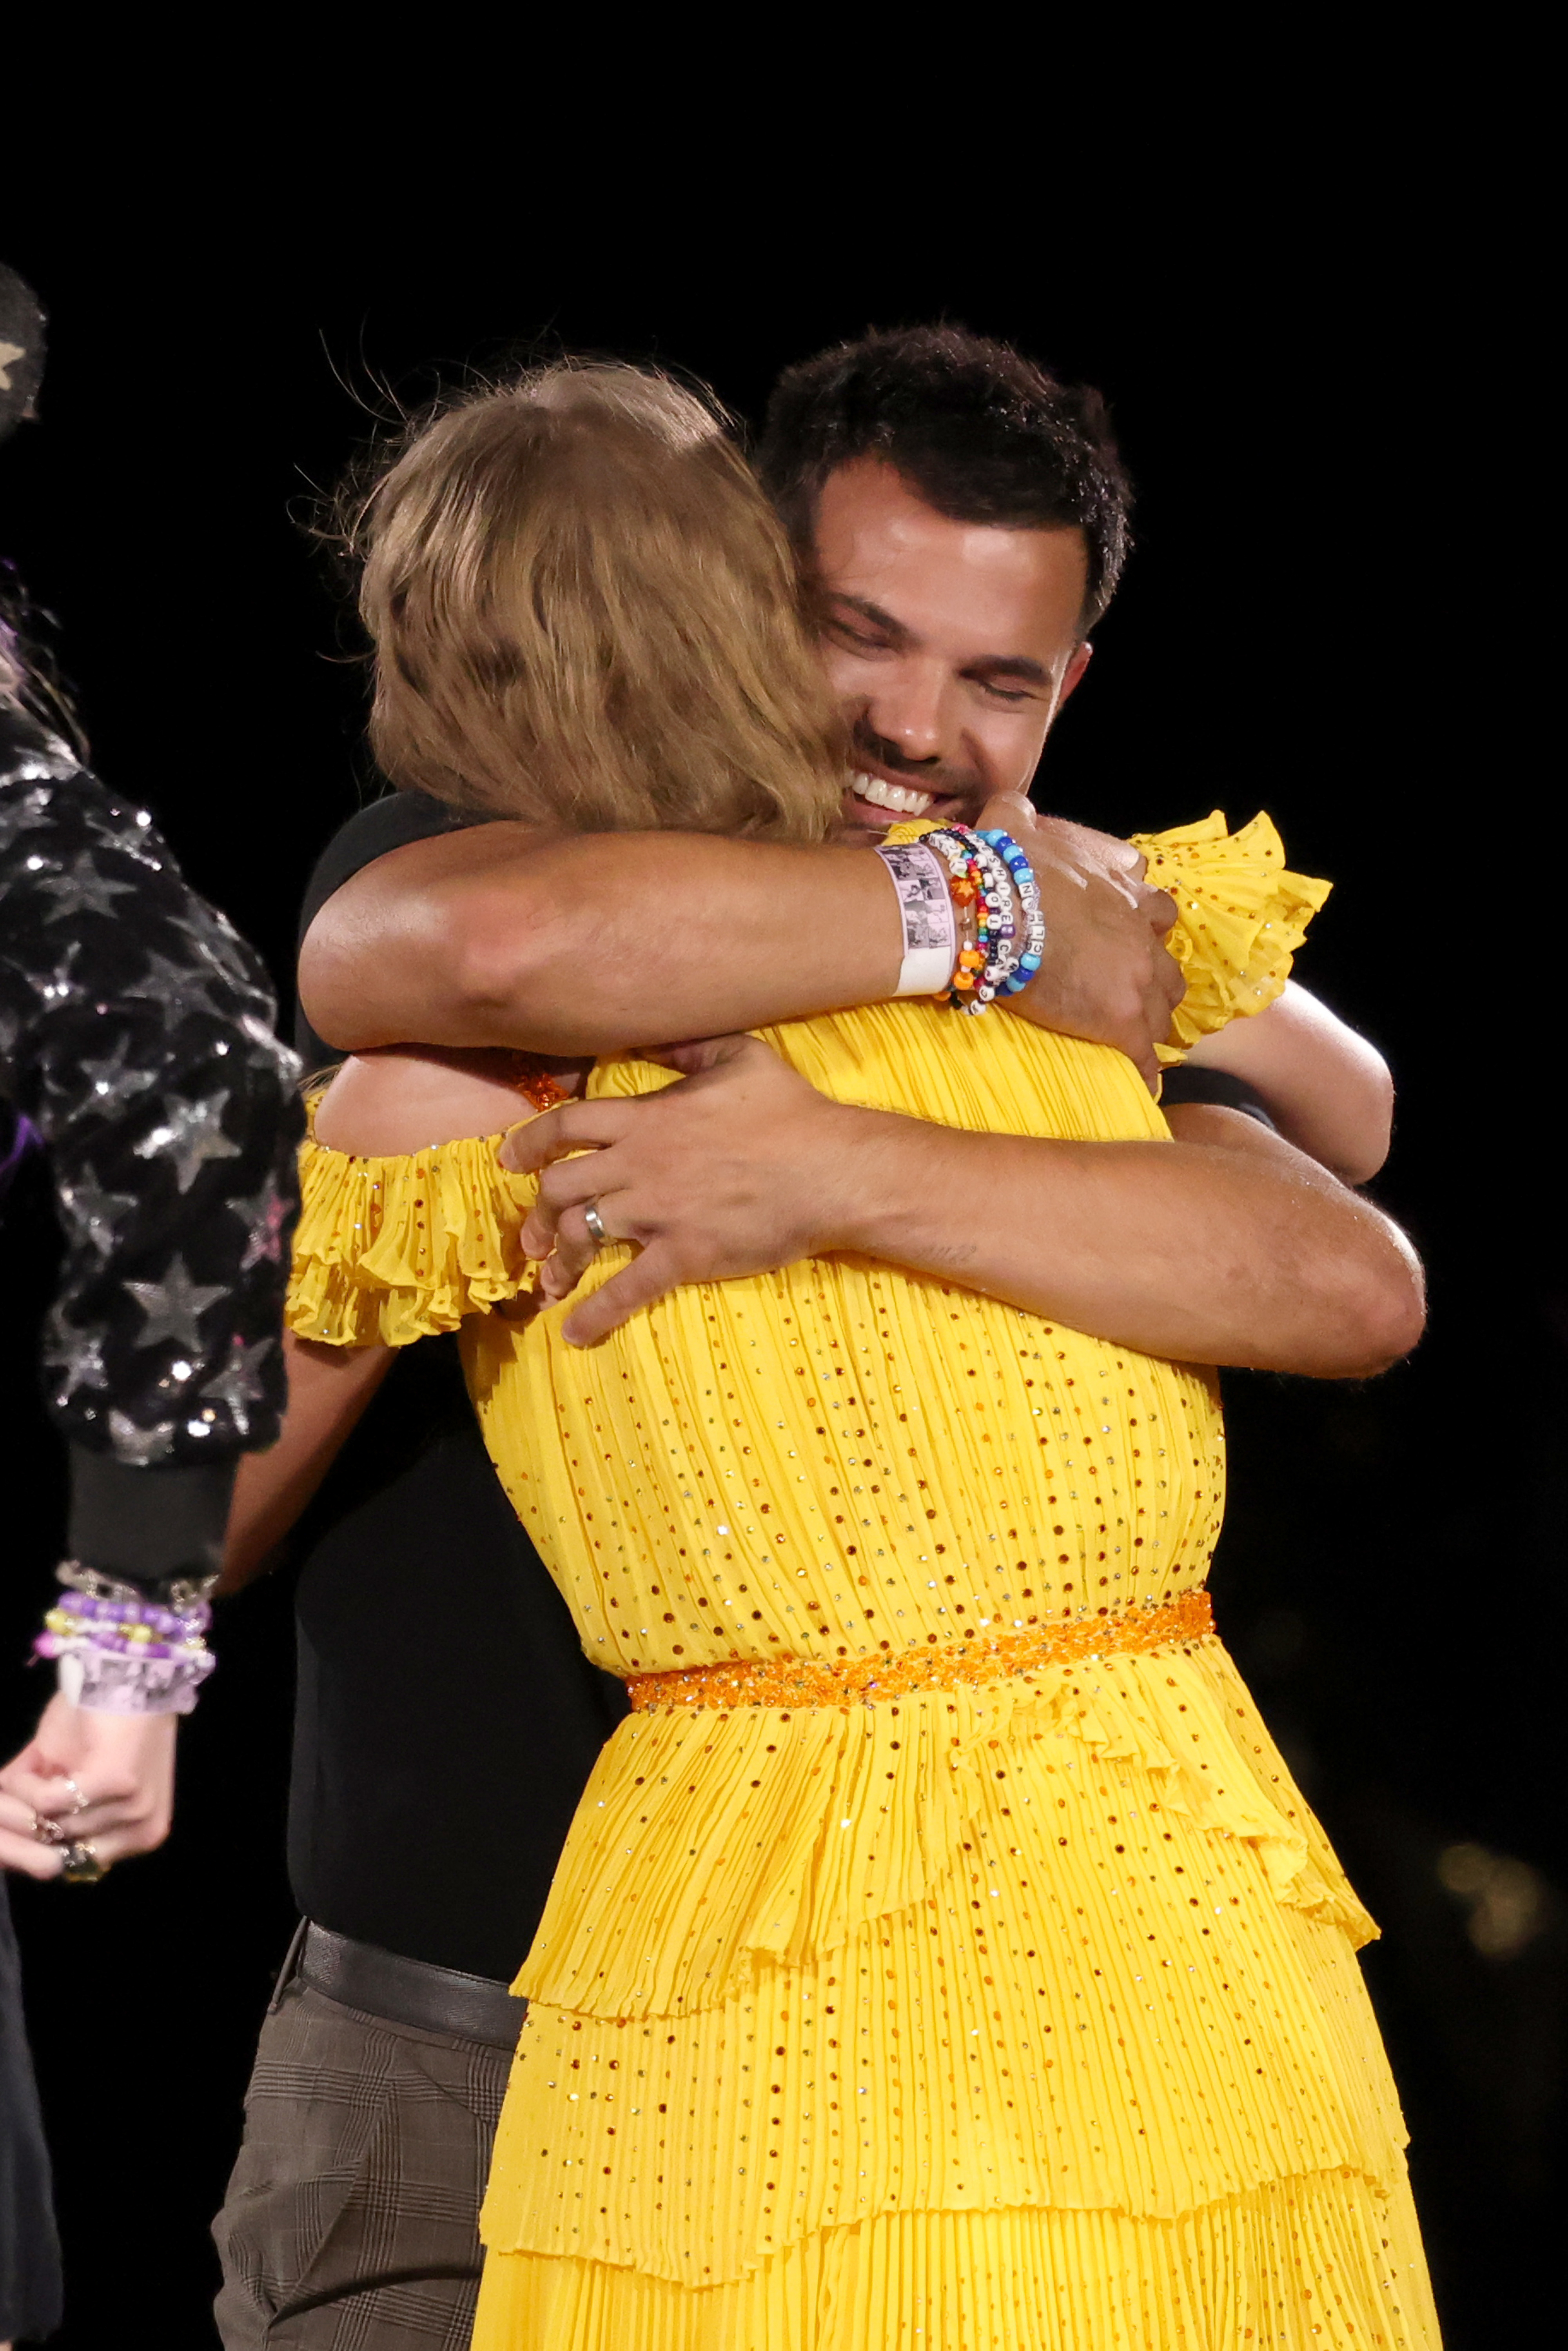 Swift and Lautner embracing